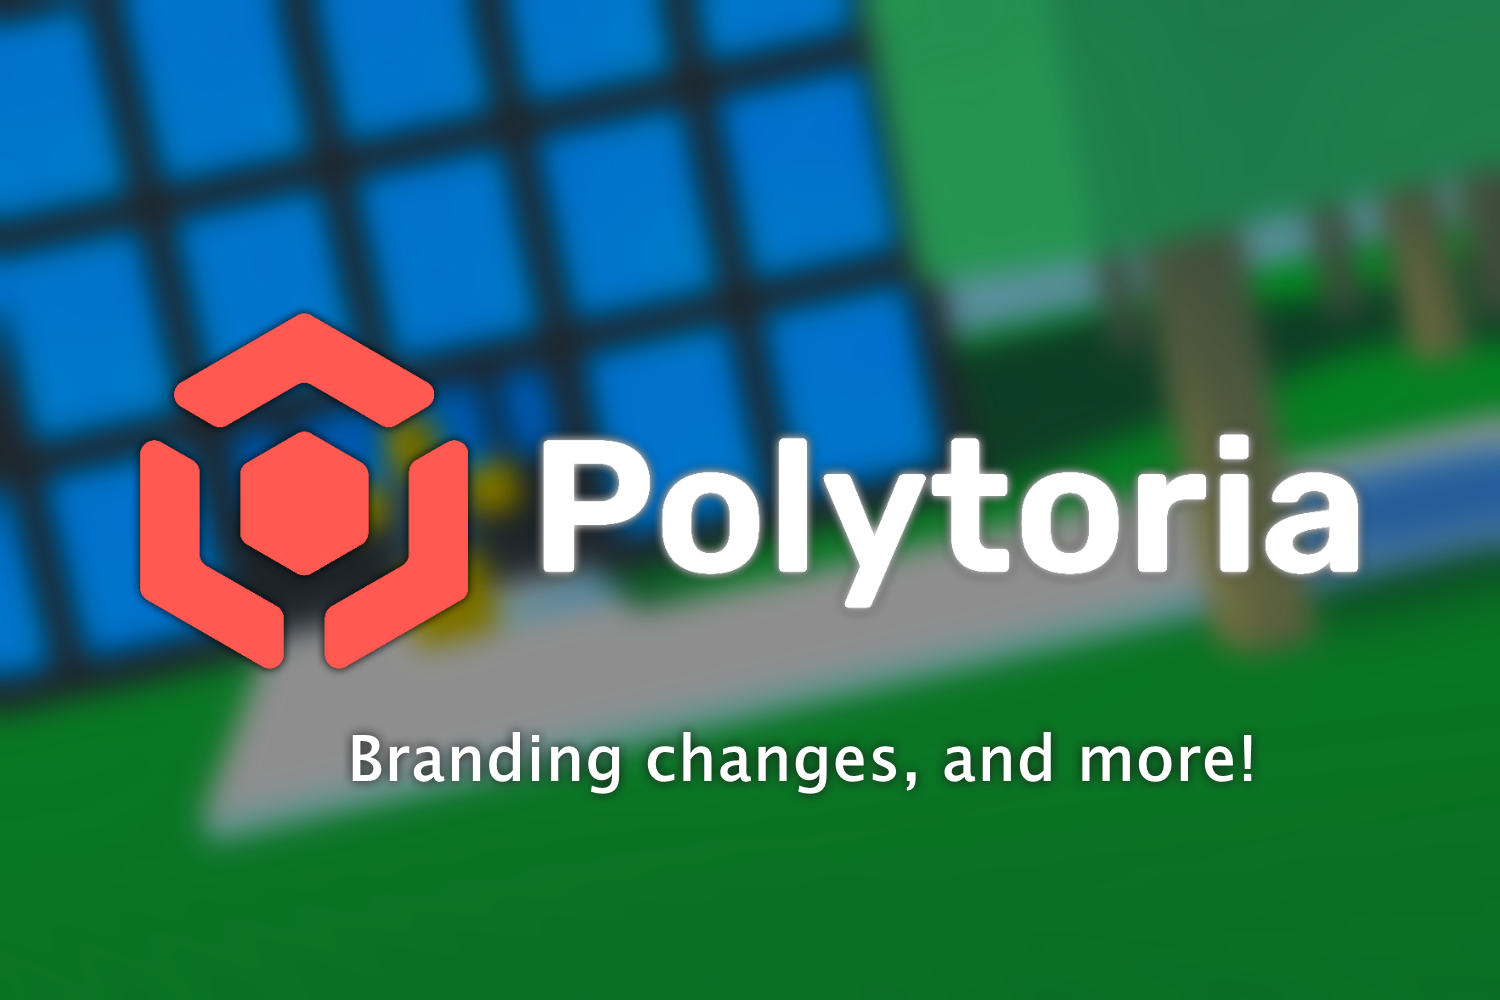 Branding changes, and more!